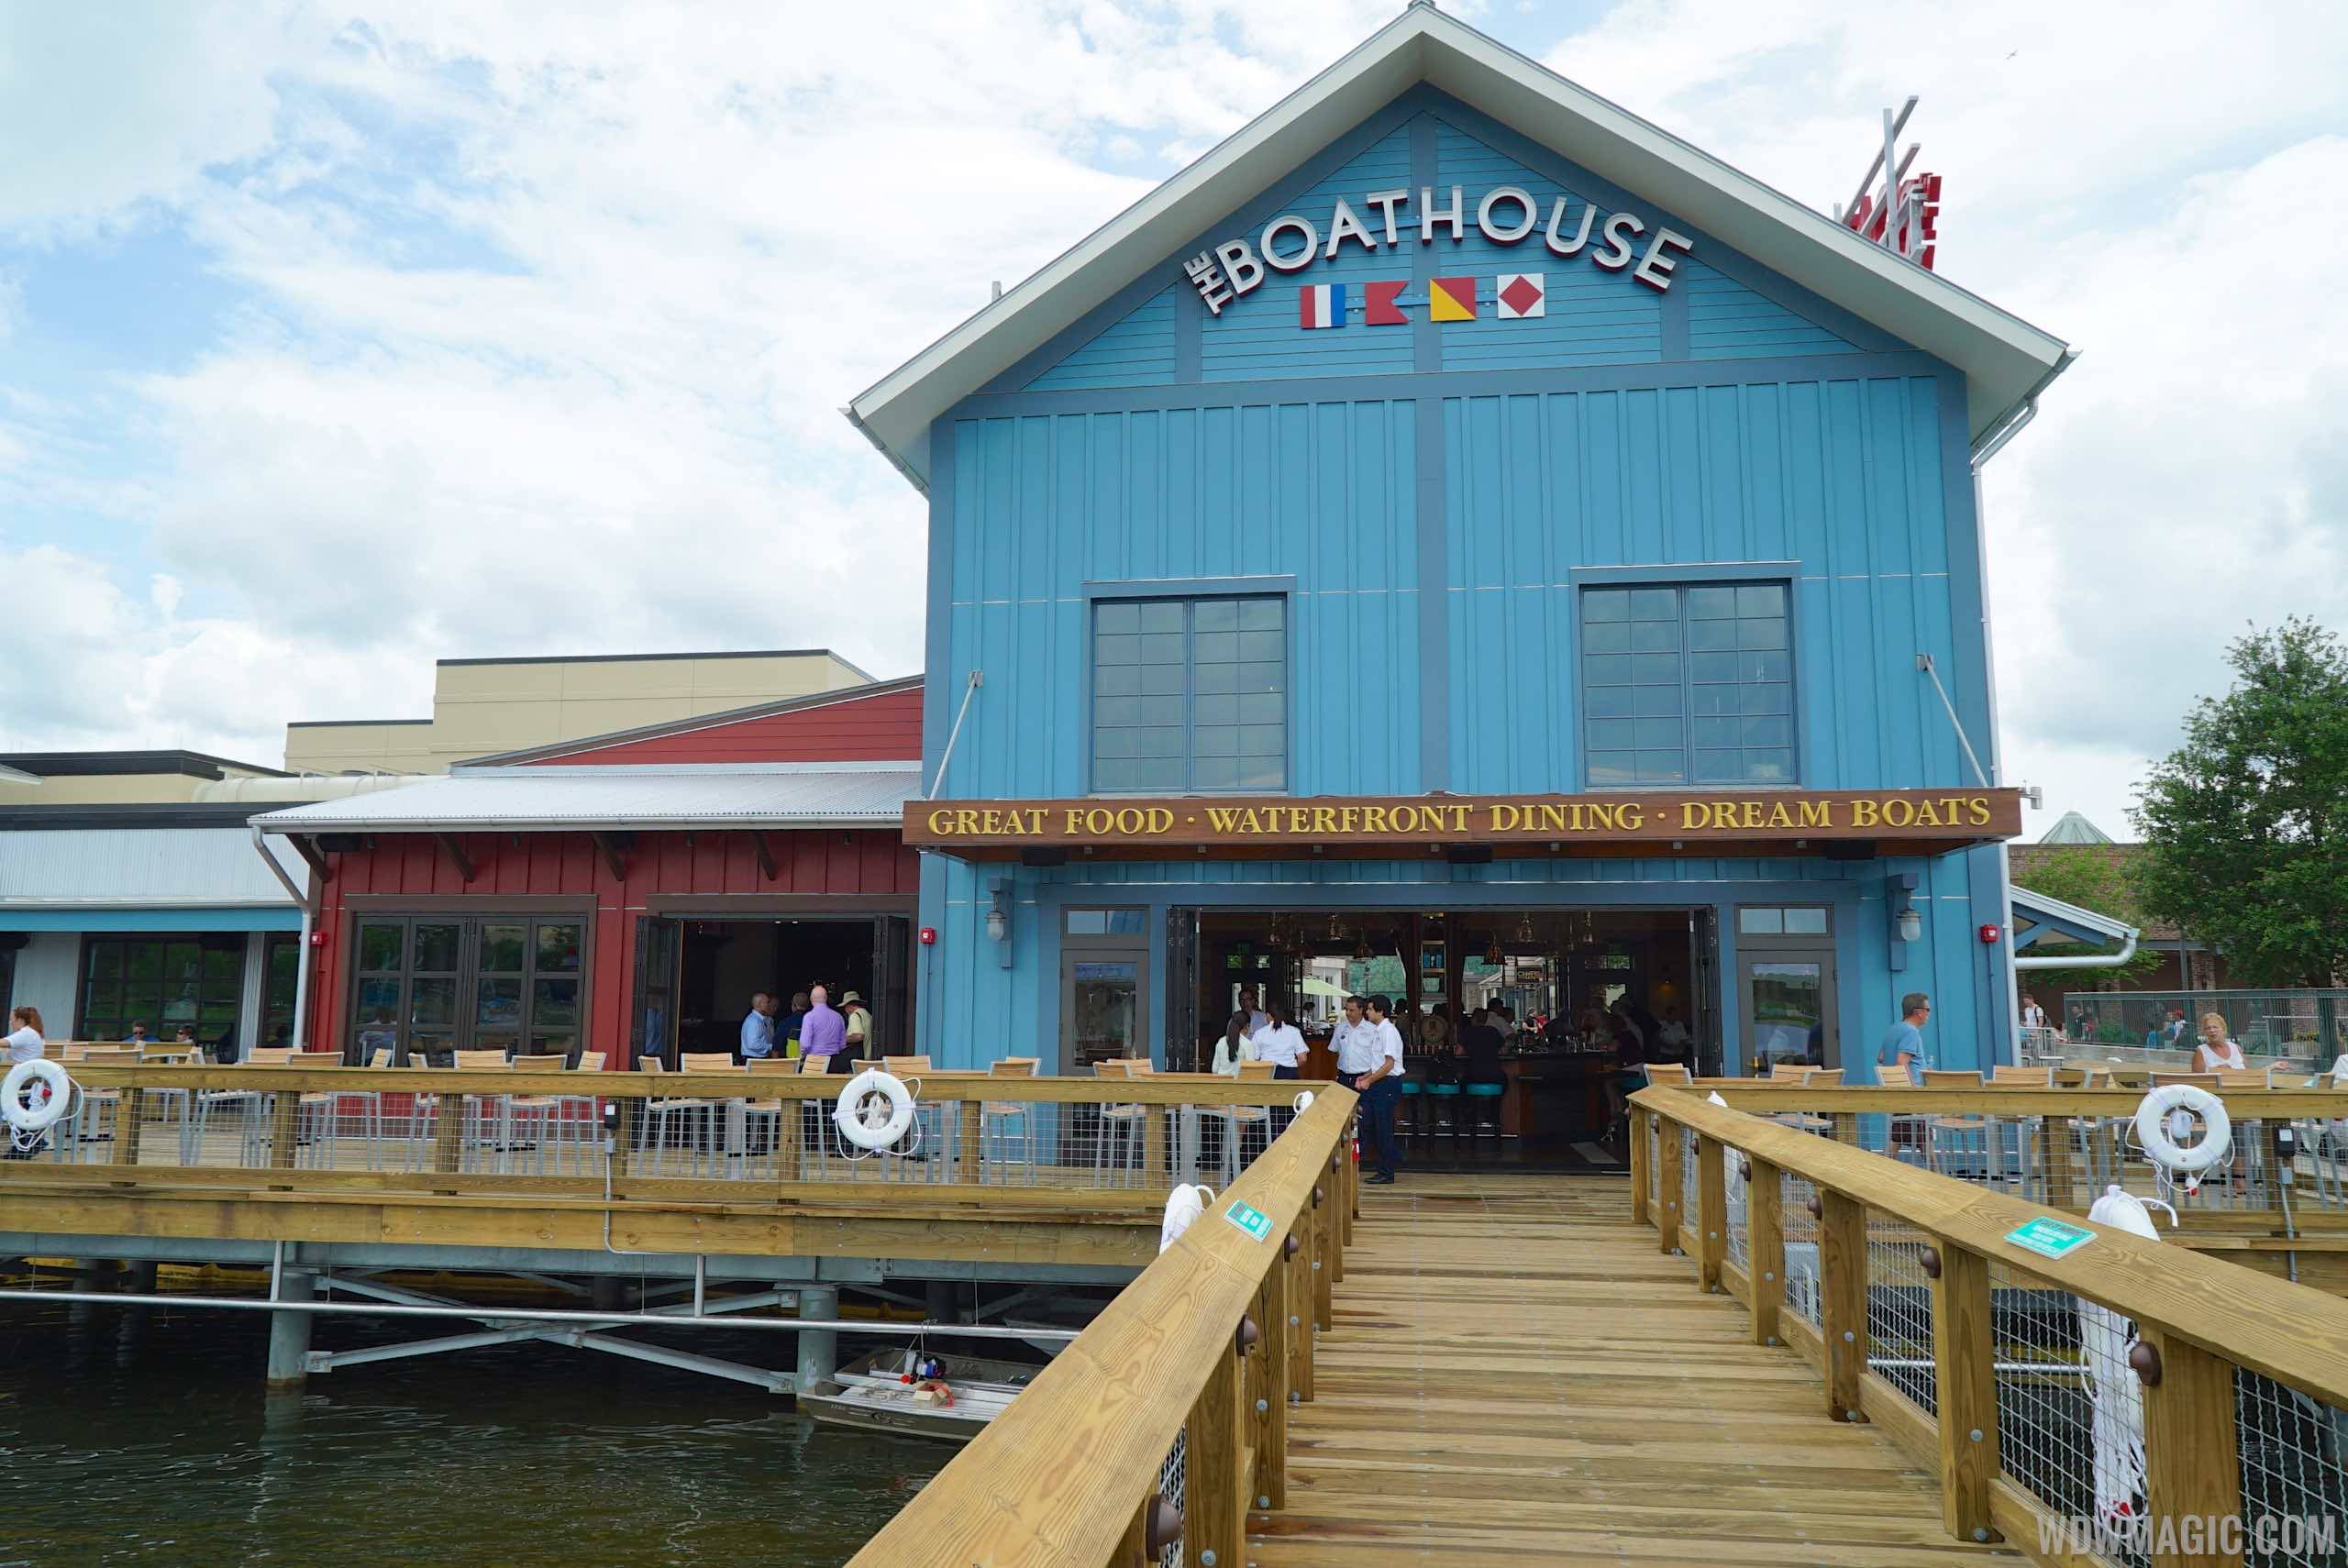 The BOATHOUSE - Waterside of The BOATHOUSE